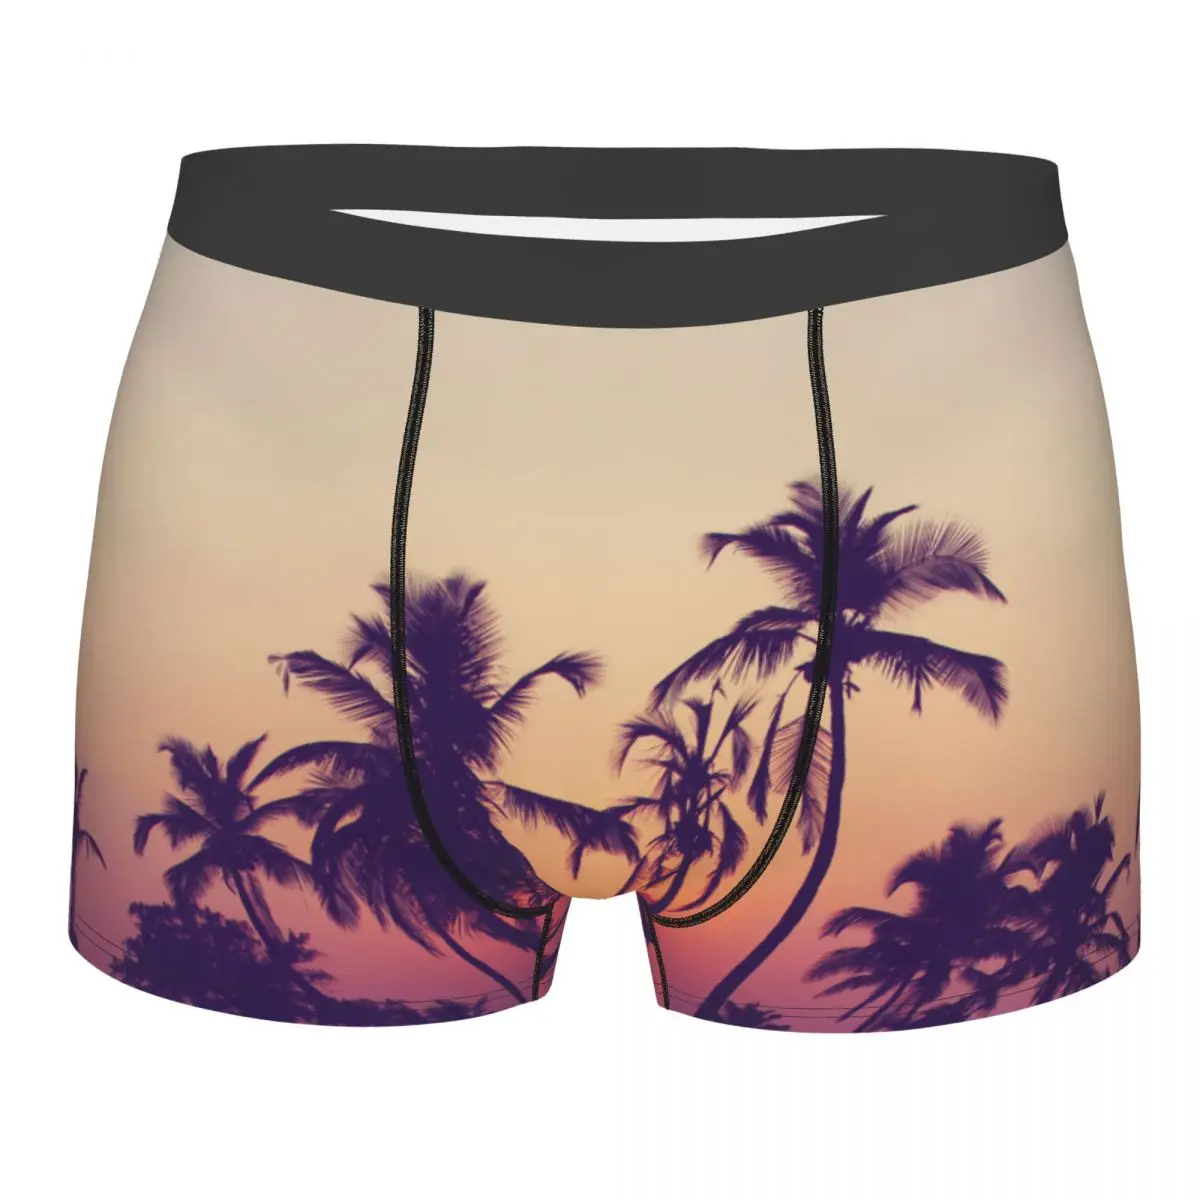 

Boxer Men Underwear Male Panties Vintage Silhouette Of Palm Trees At Sunset Shorts Boxer Comfortable Shorts Homme